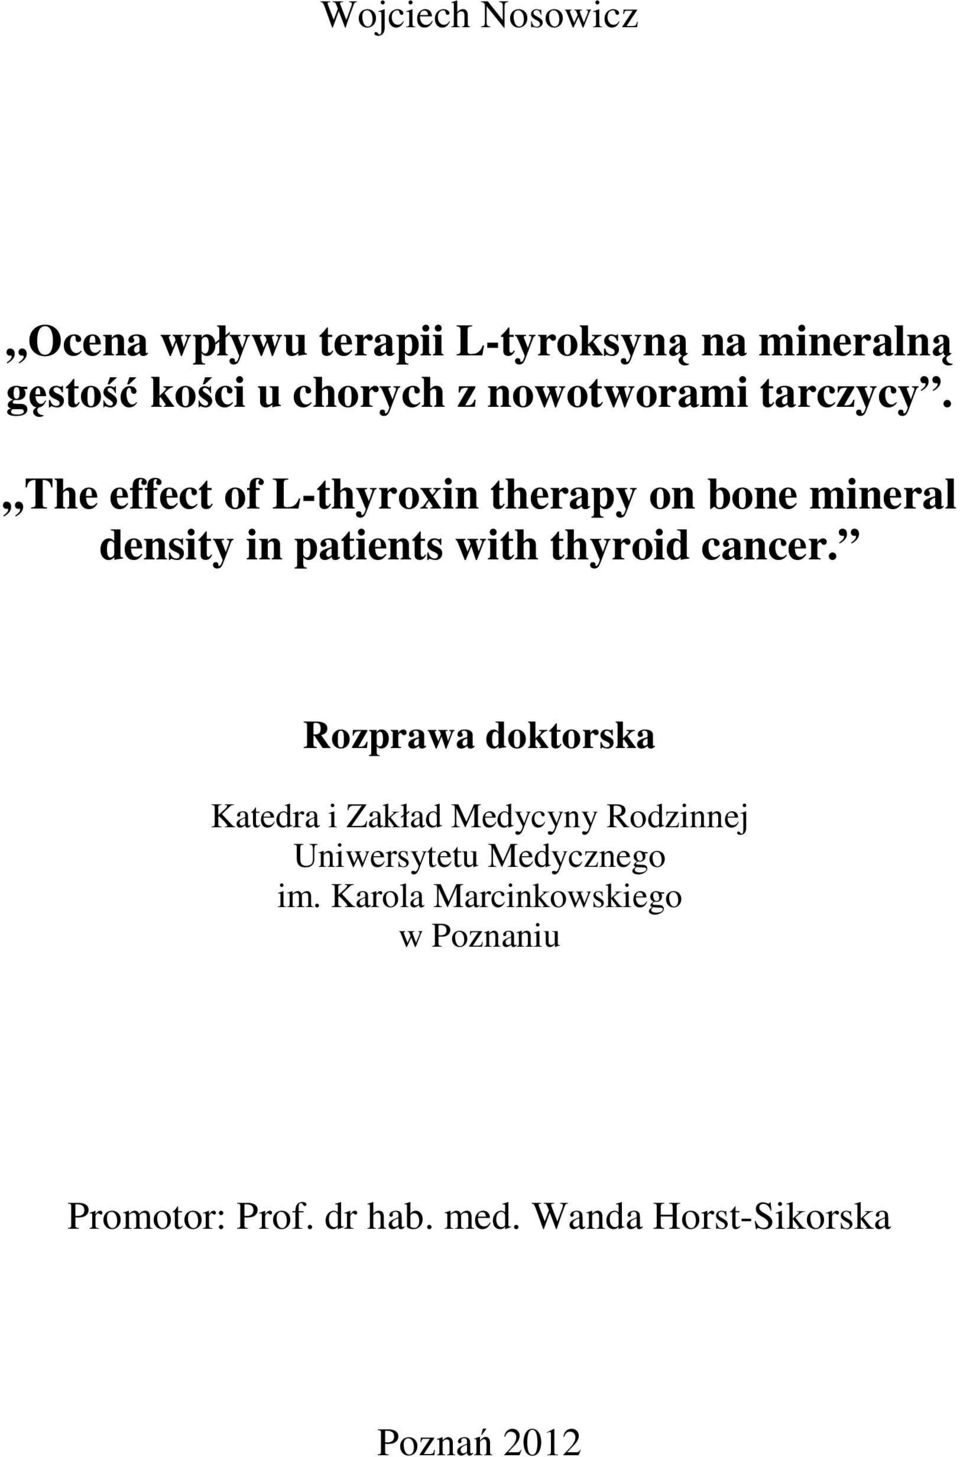 The effect of L-thyroxin therapy on bone mineral density in patients with thyroid cancer.